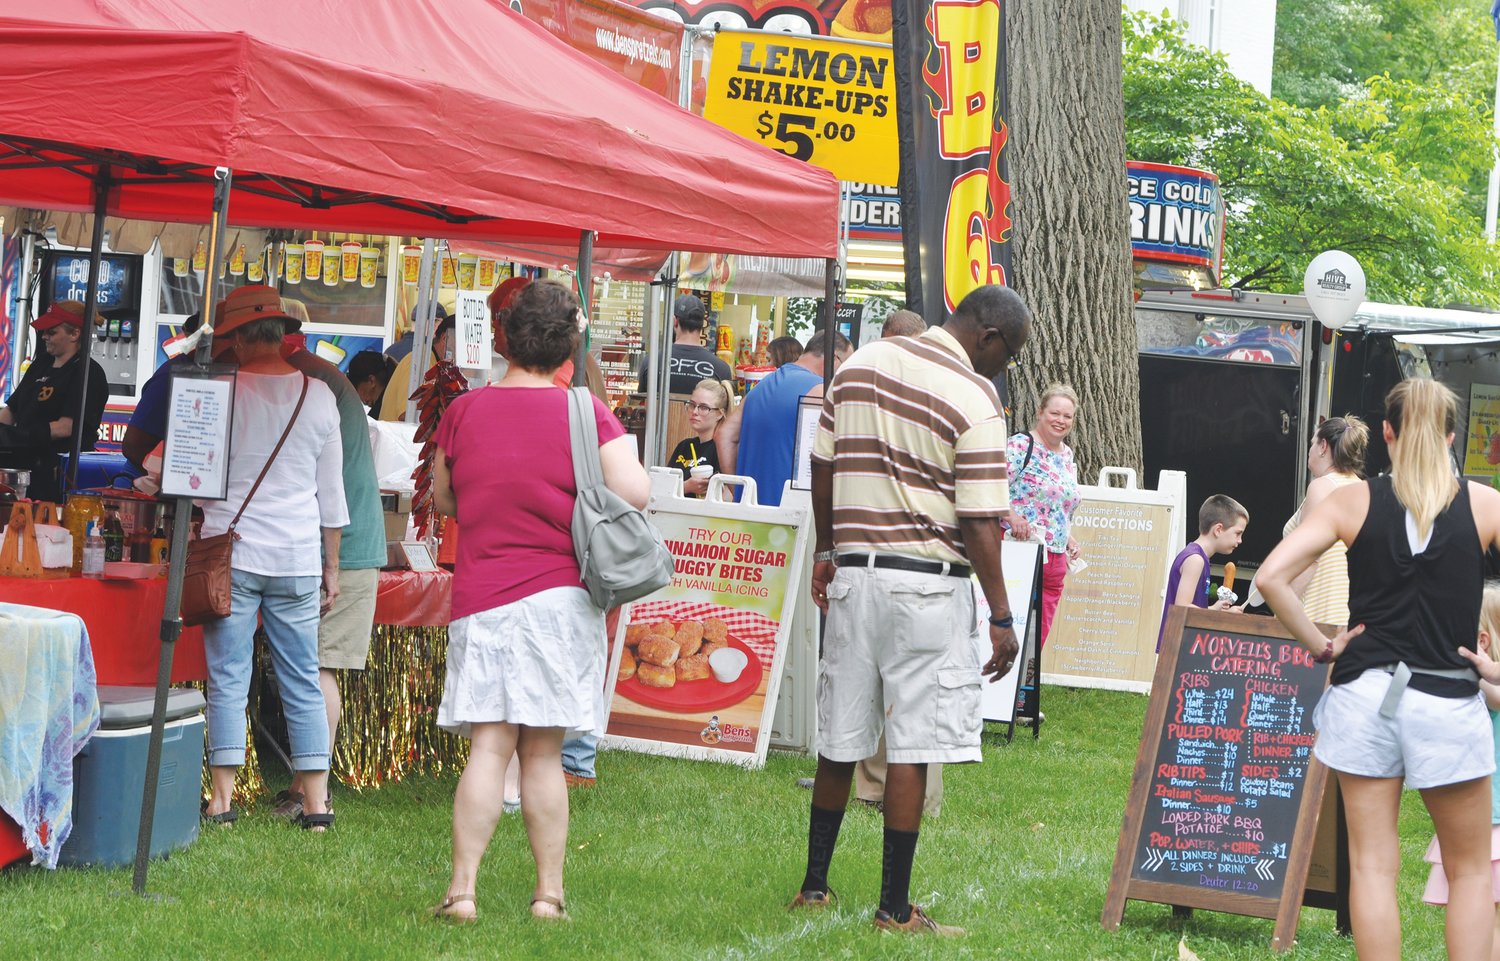 ABOVE: People look at the menu for Norvell’s BBQ booth Friday at the Strawberry Festival. The festival has done away this year with the ticket booth for the food area. Vendors are accepting cash and/or credit and debit cards.